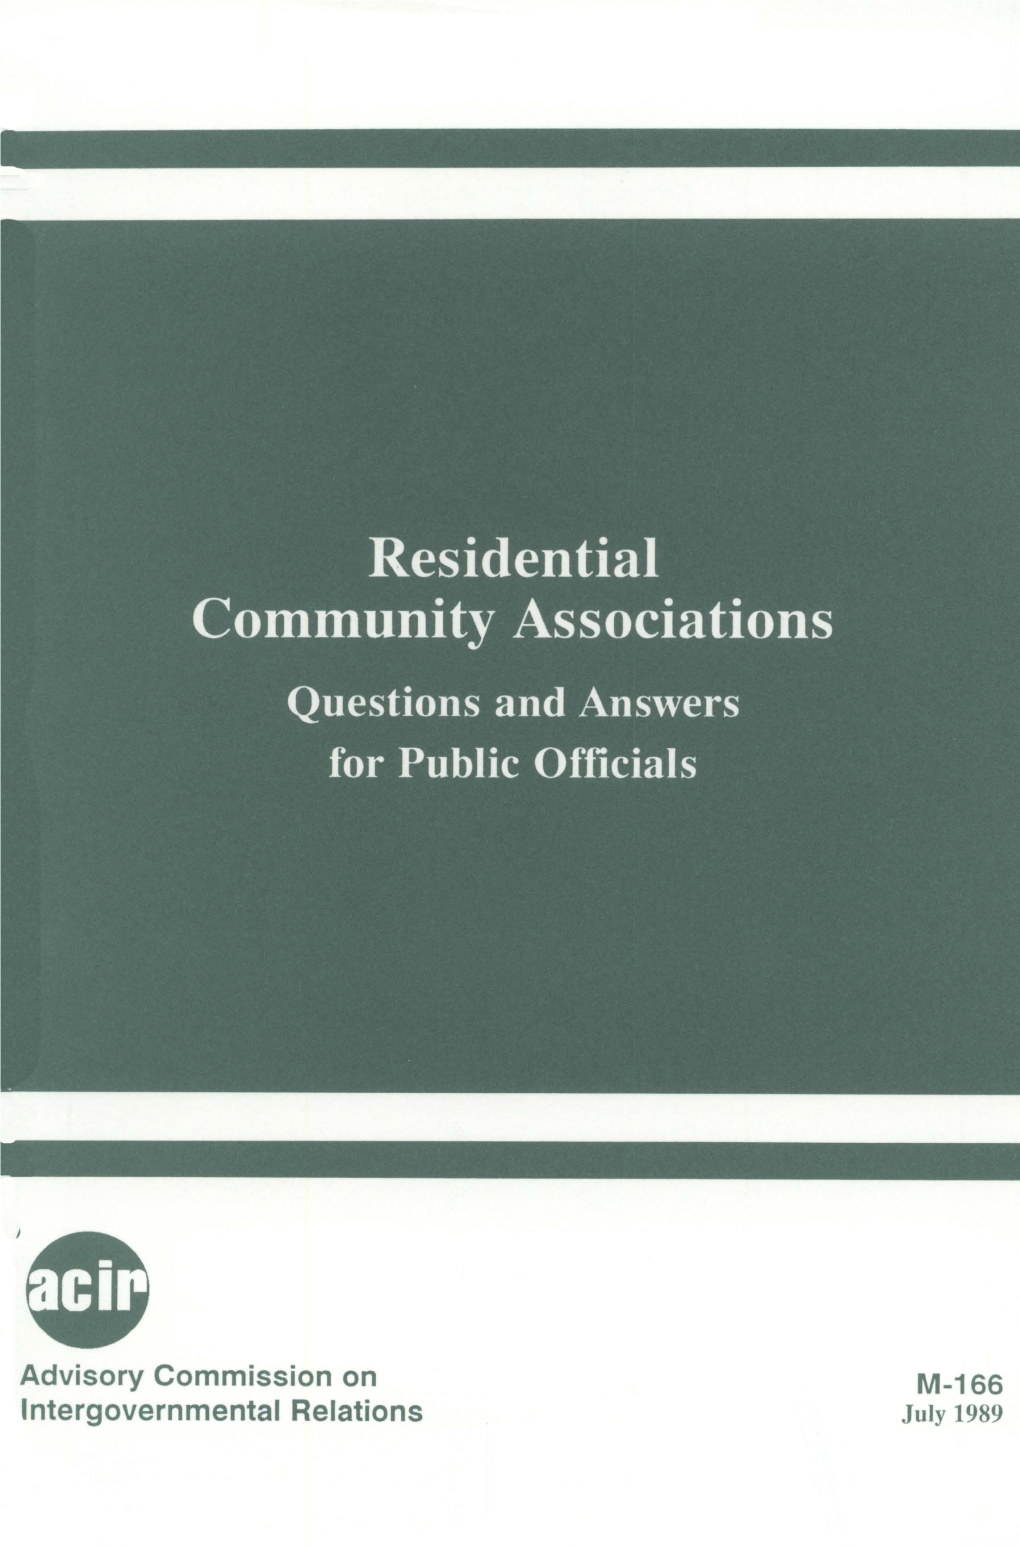 Residential Community Associations: Questions and Answers for Public